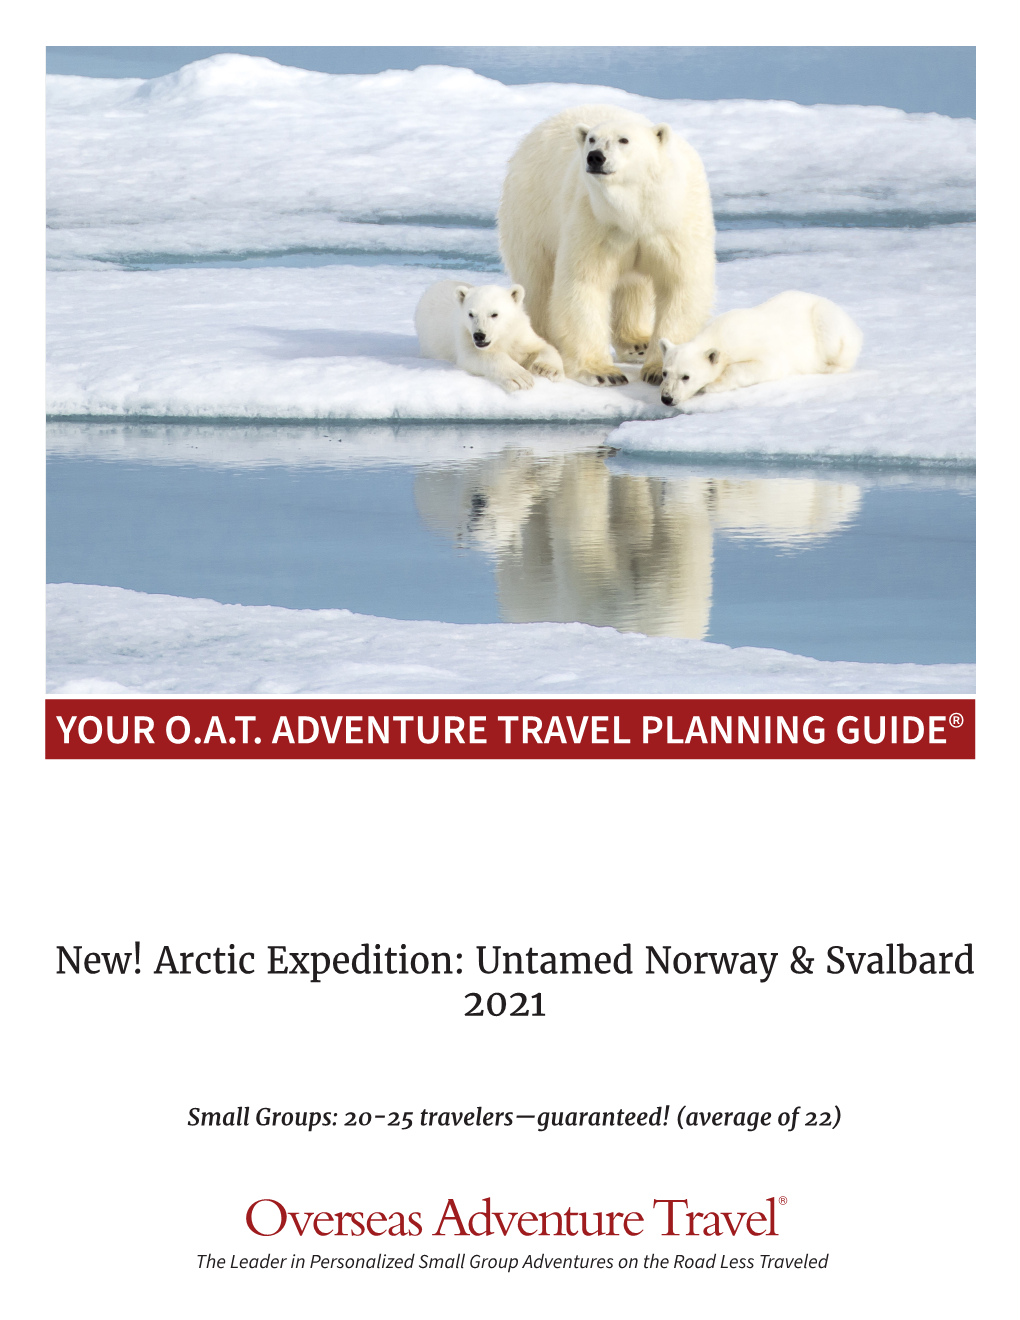 View Travel Planning Guide